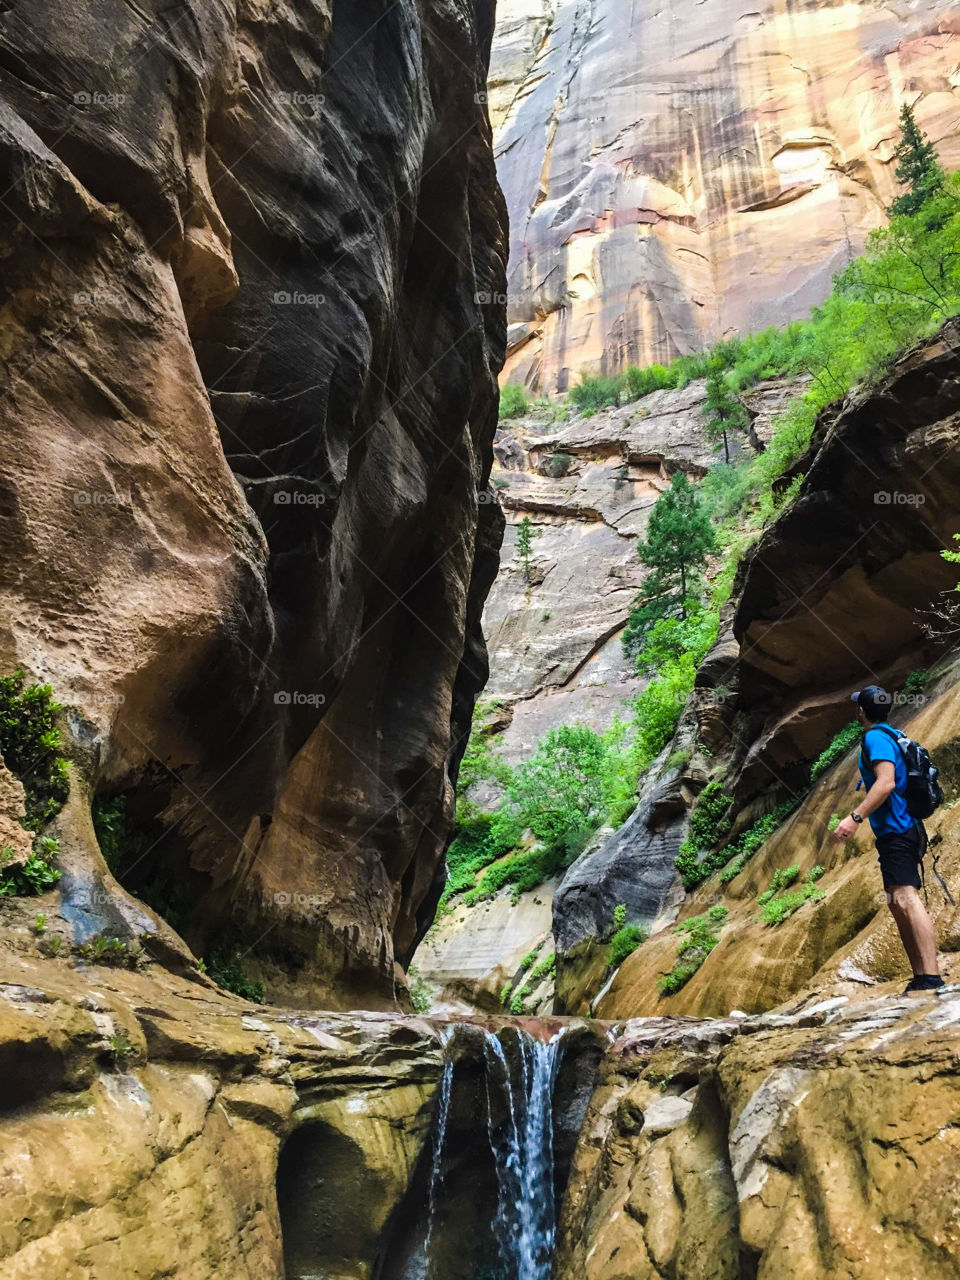 Exploring the narrows in Zion National Park